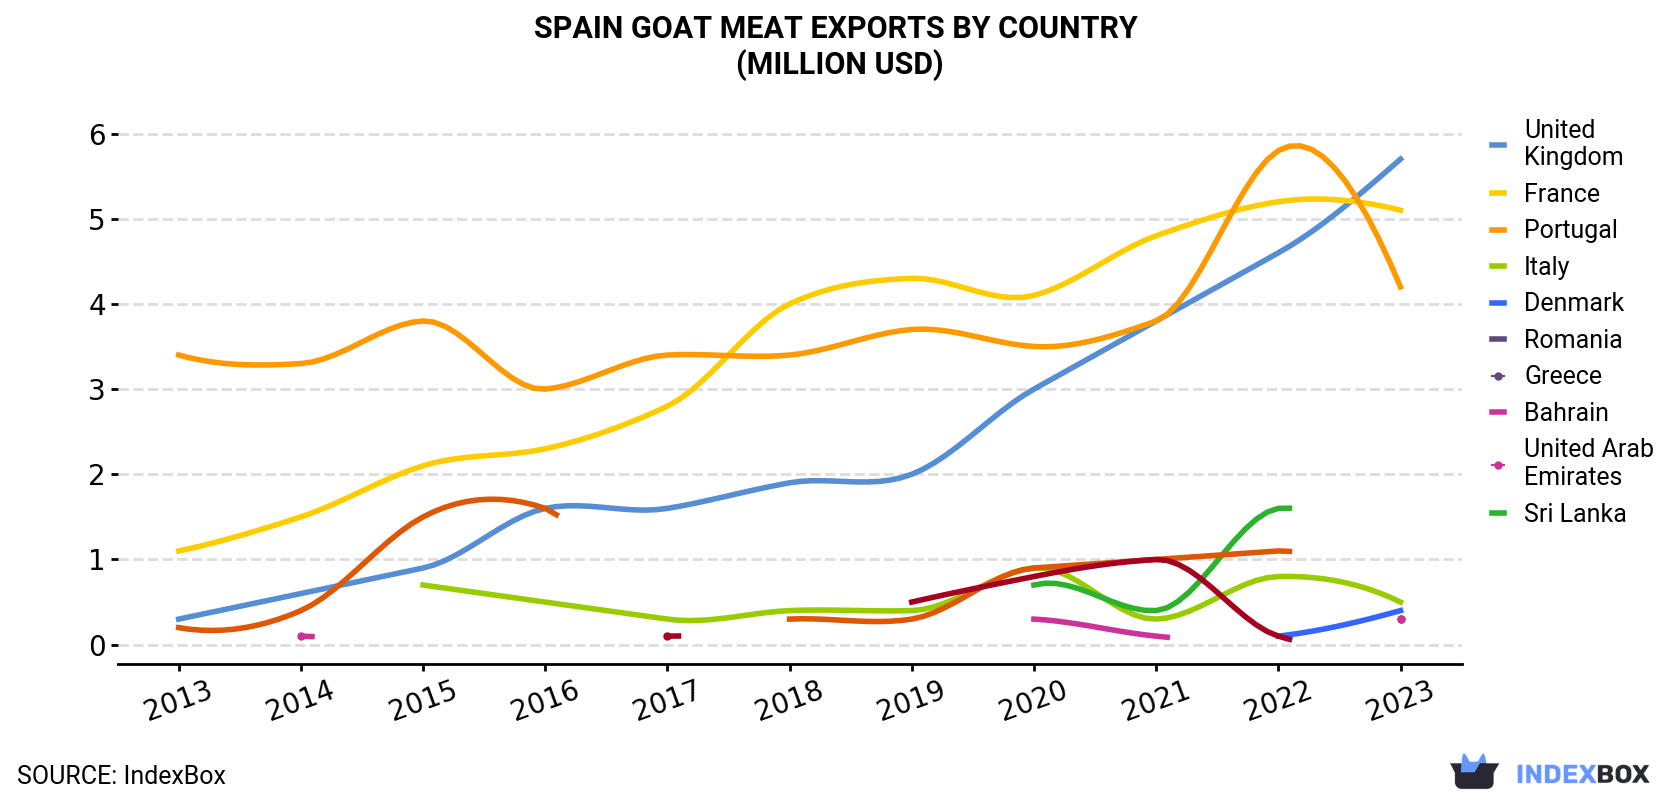 Spain Goat Meat Exports By Country (Million USD)